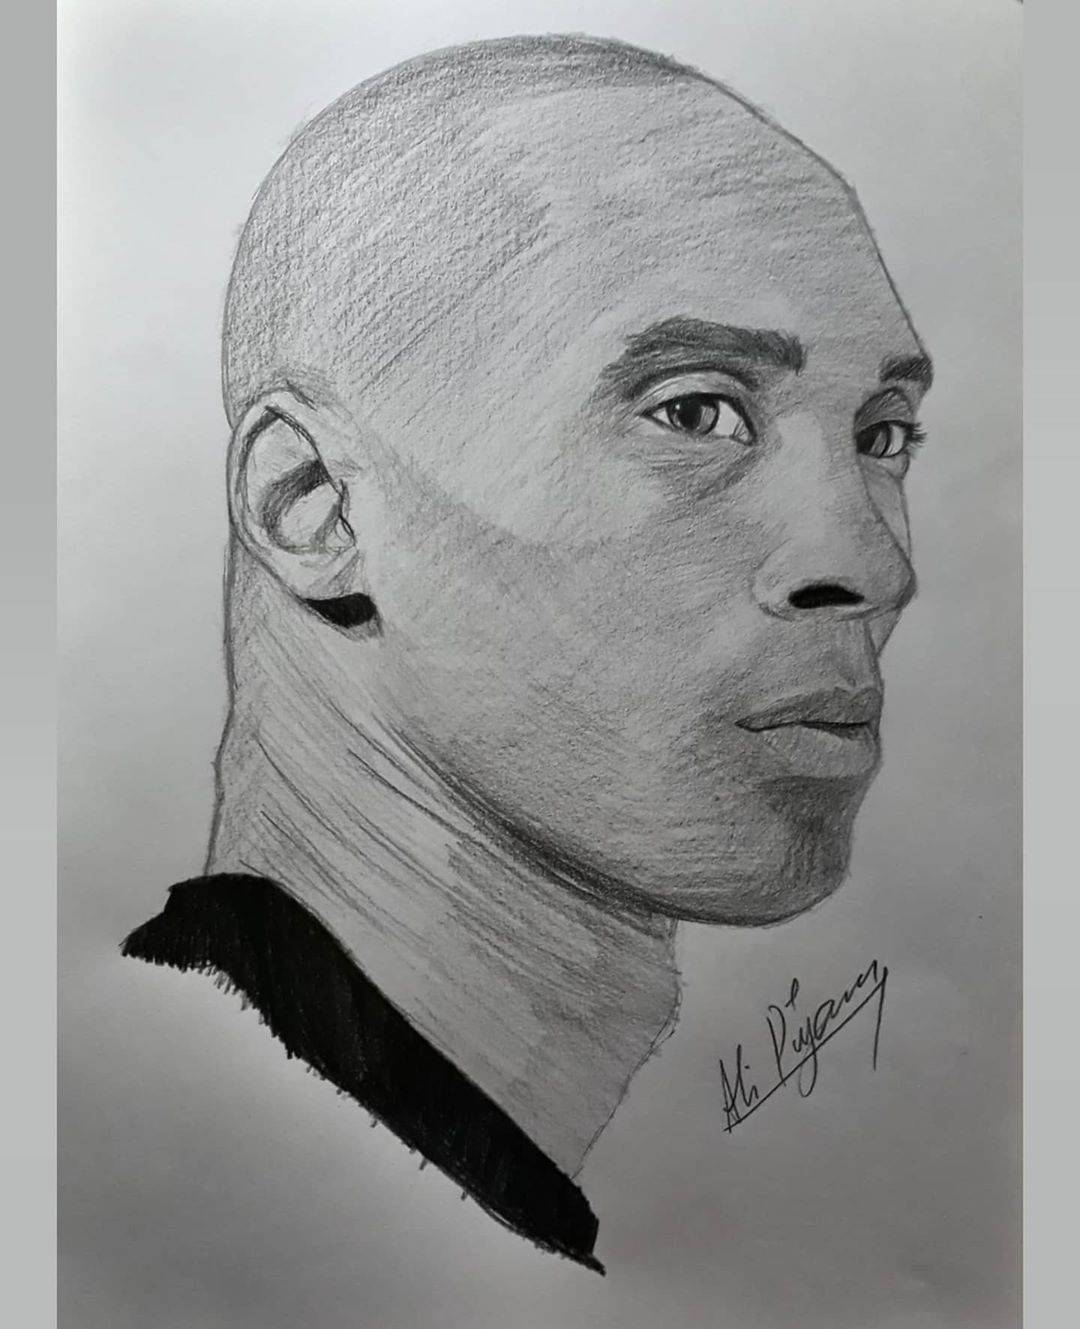 How to draw Kobe Bryant Pencil drawing tutorial 